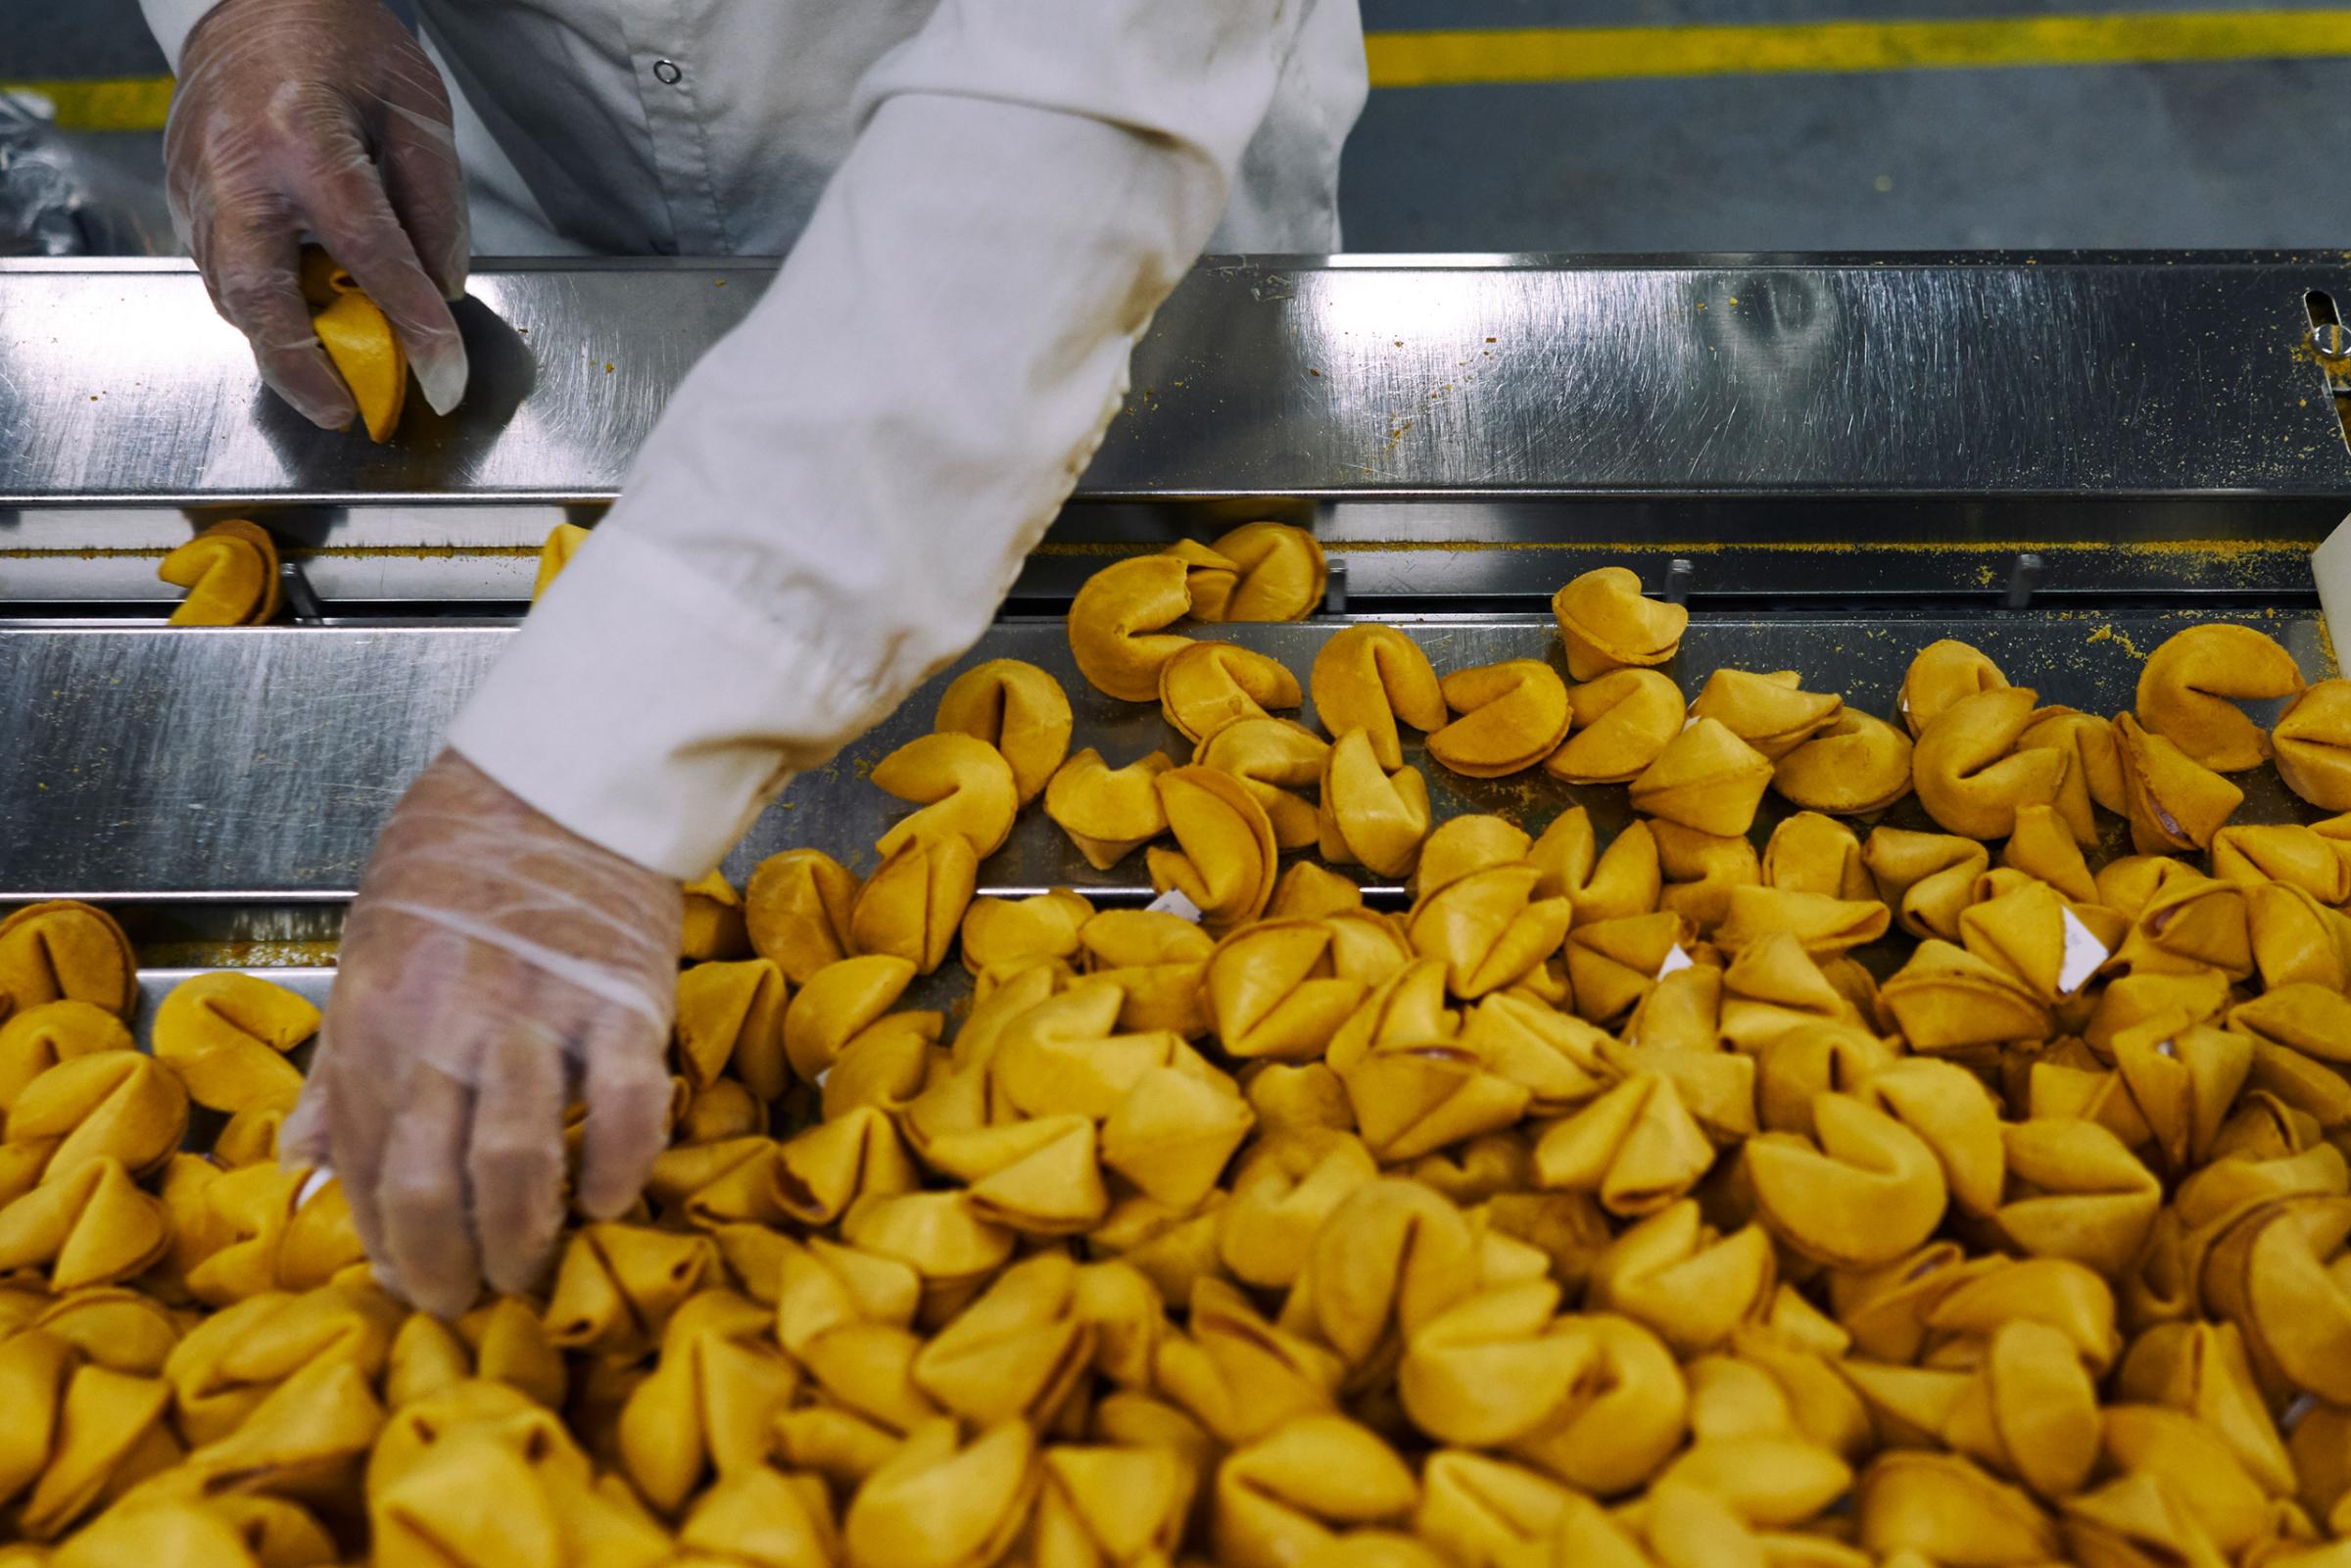 Inside the fortune cookie manufacturing plant of Wonton Food Inc. Brooklyn, New York.Jan. 18, 2017.